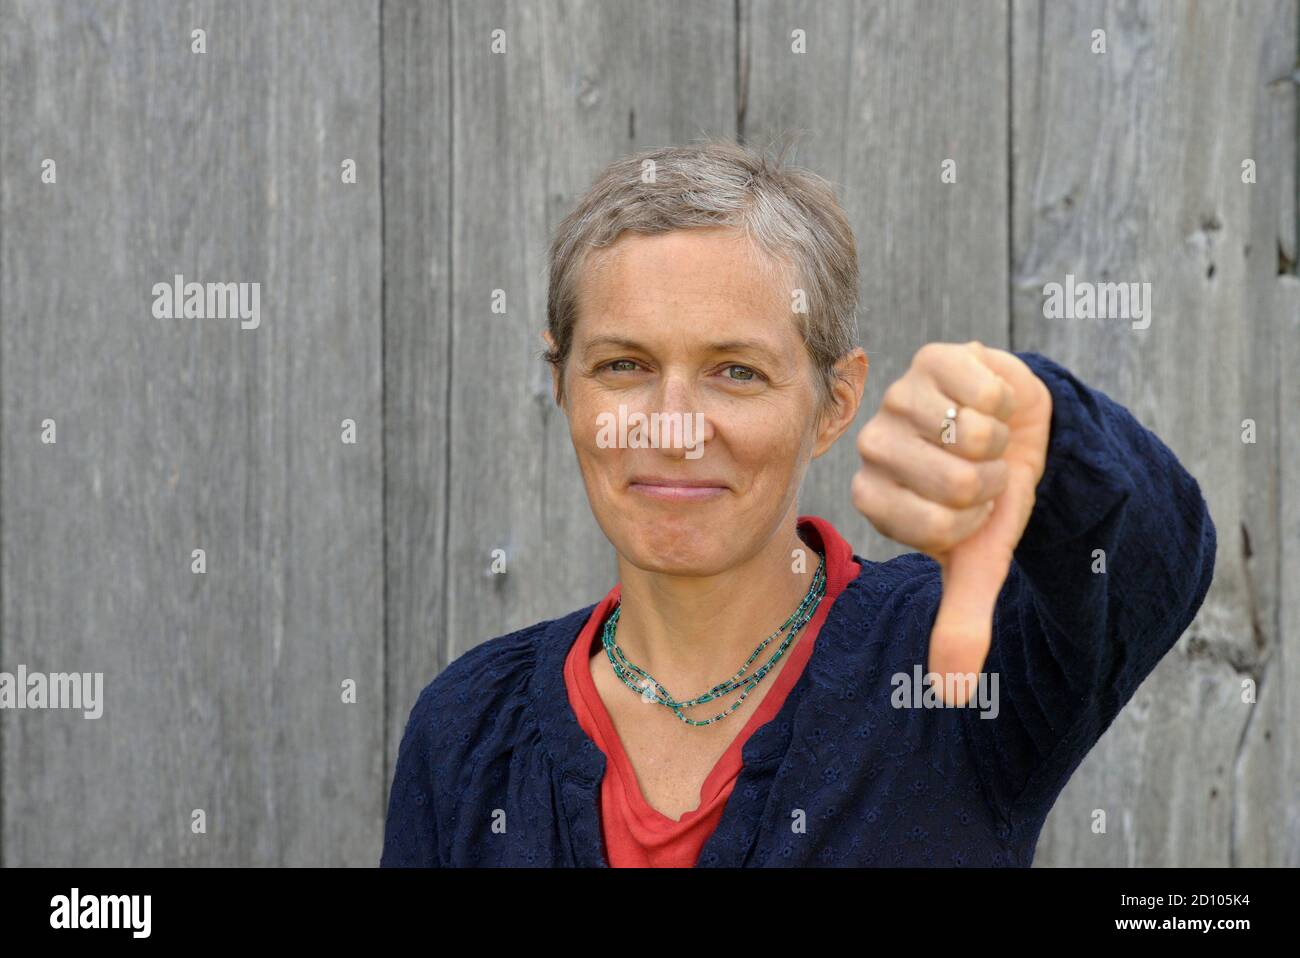 Discontent middle-aged Caucasian country woman with short hair shows thump down (disapproval sign), in front of old barn wood background. Stock Photo